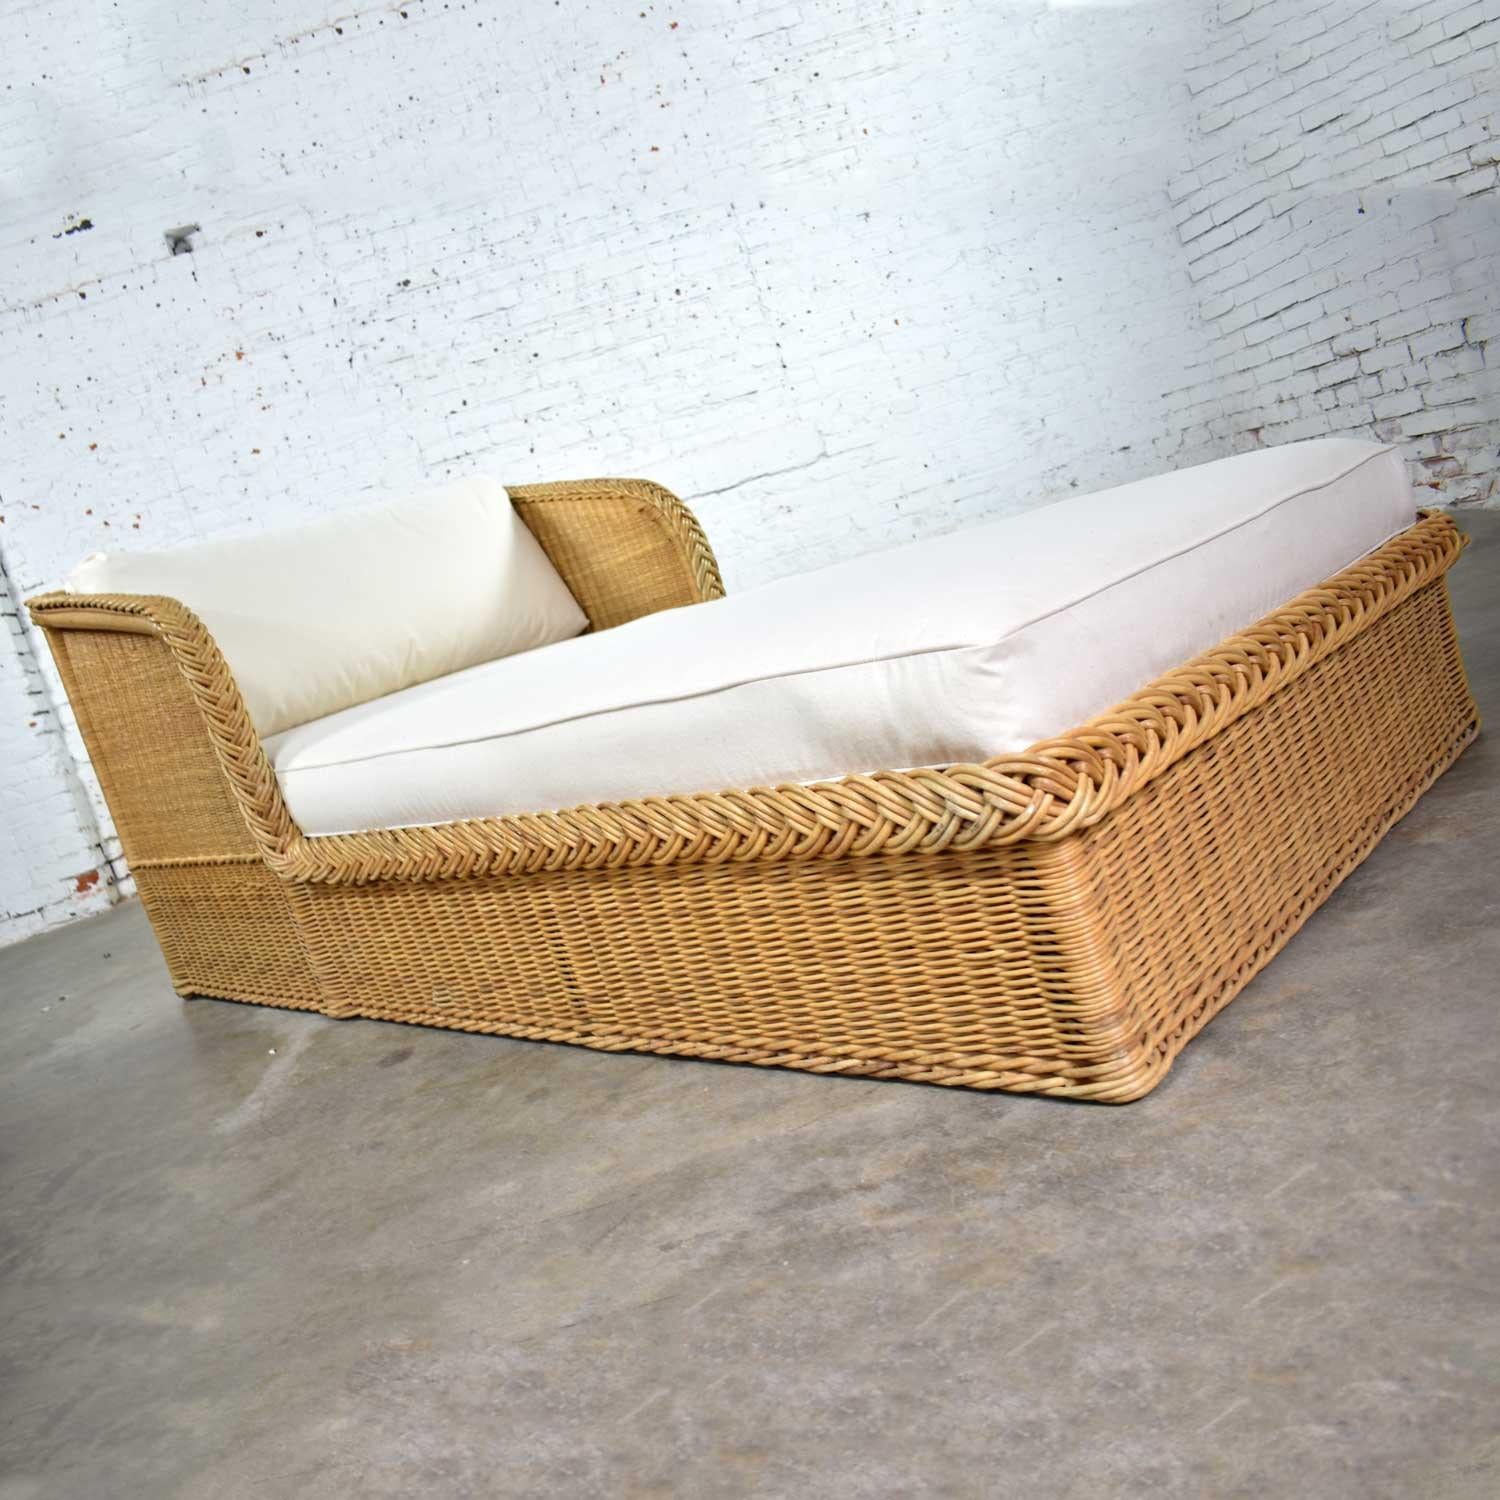 American Wide Rattan Wicker Chaise by Bielecky Brothers, Inc. New White Canvas Upholstery